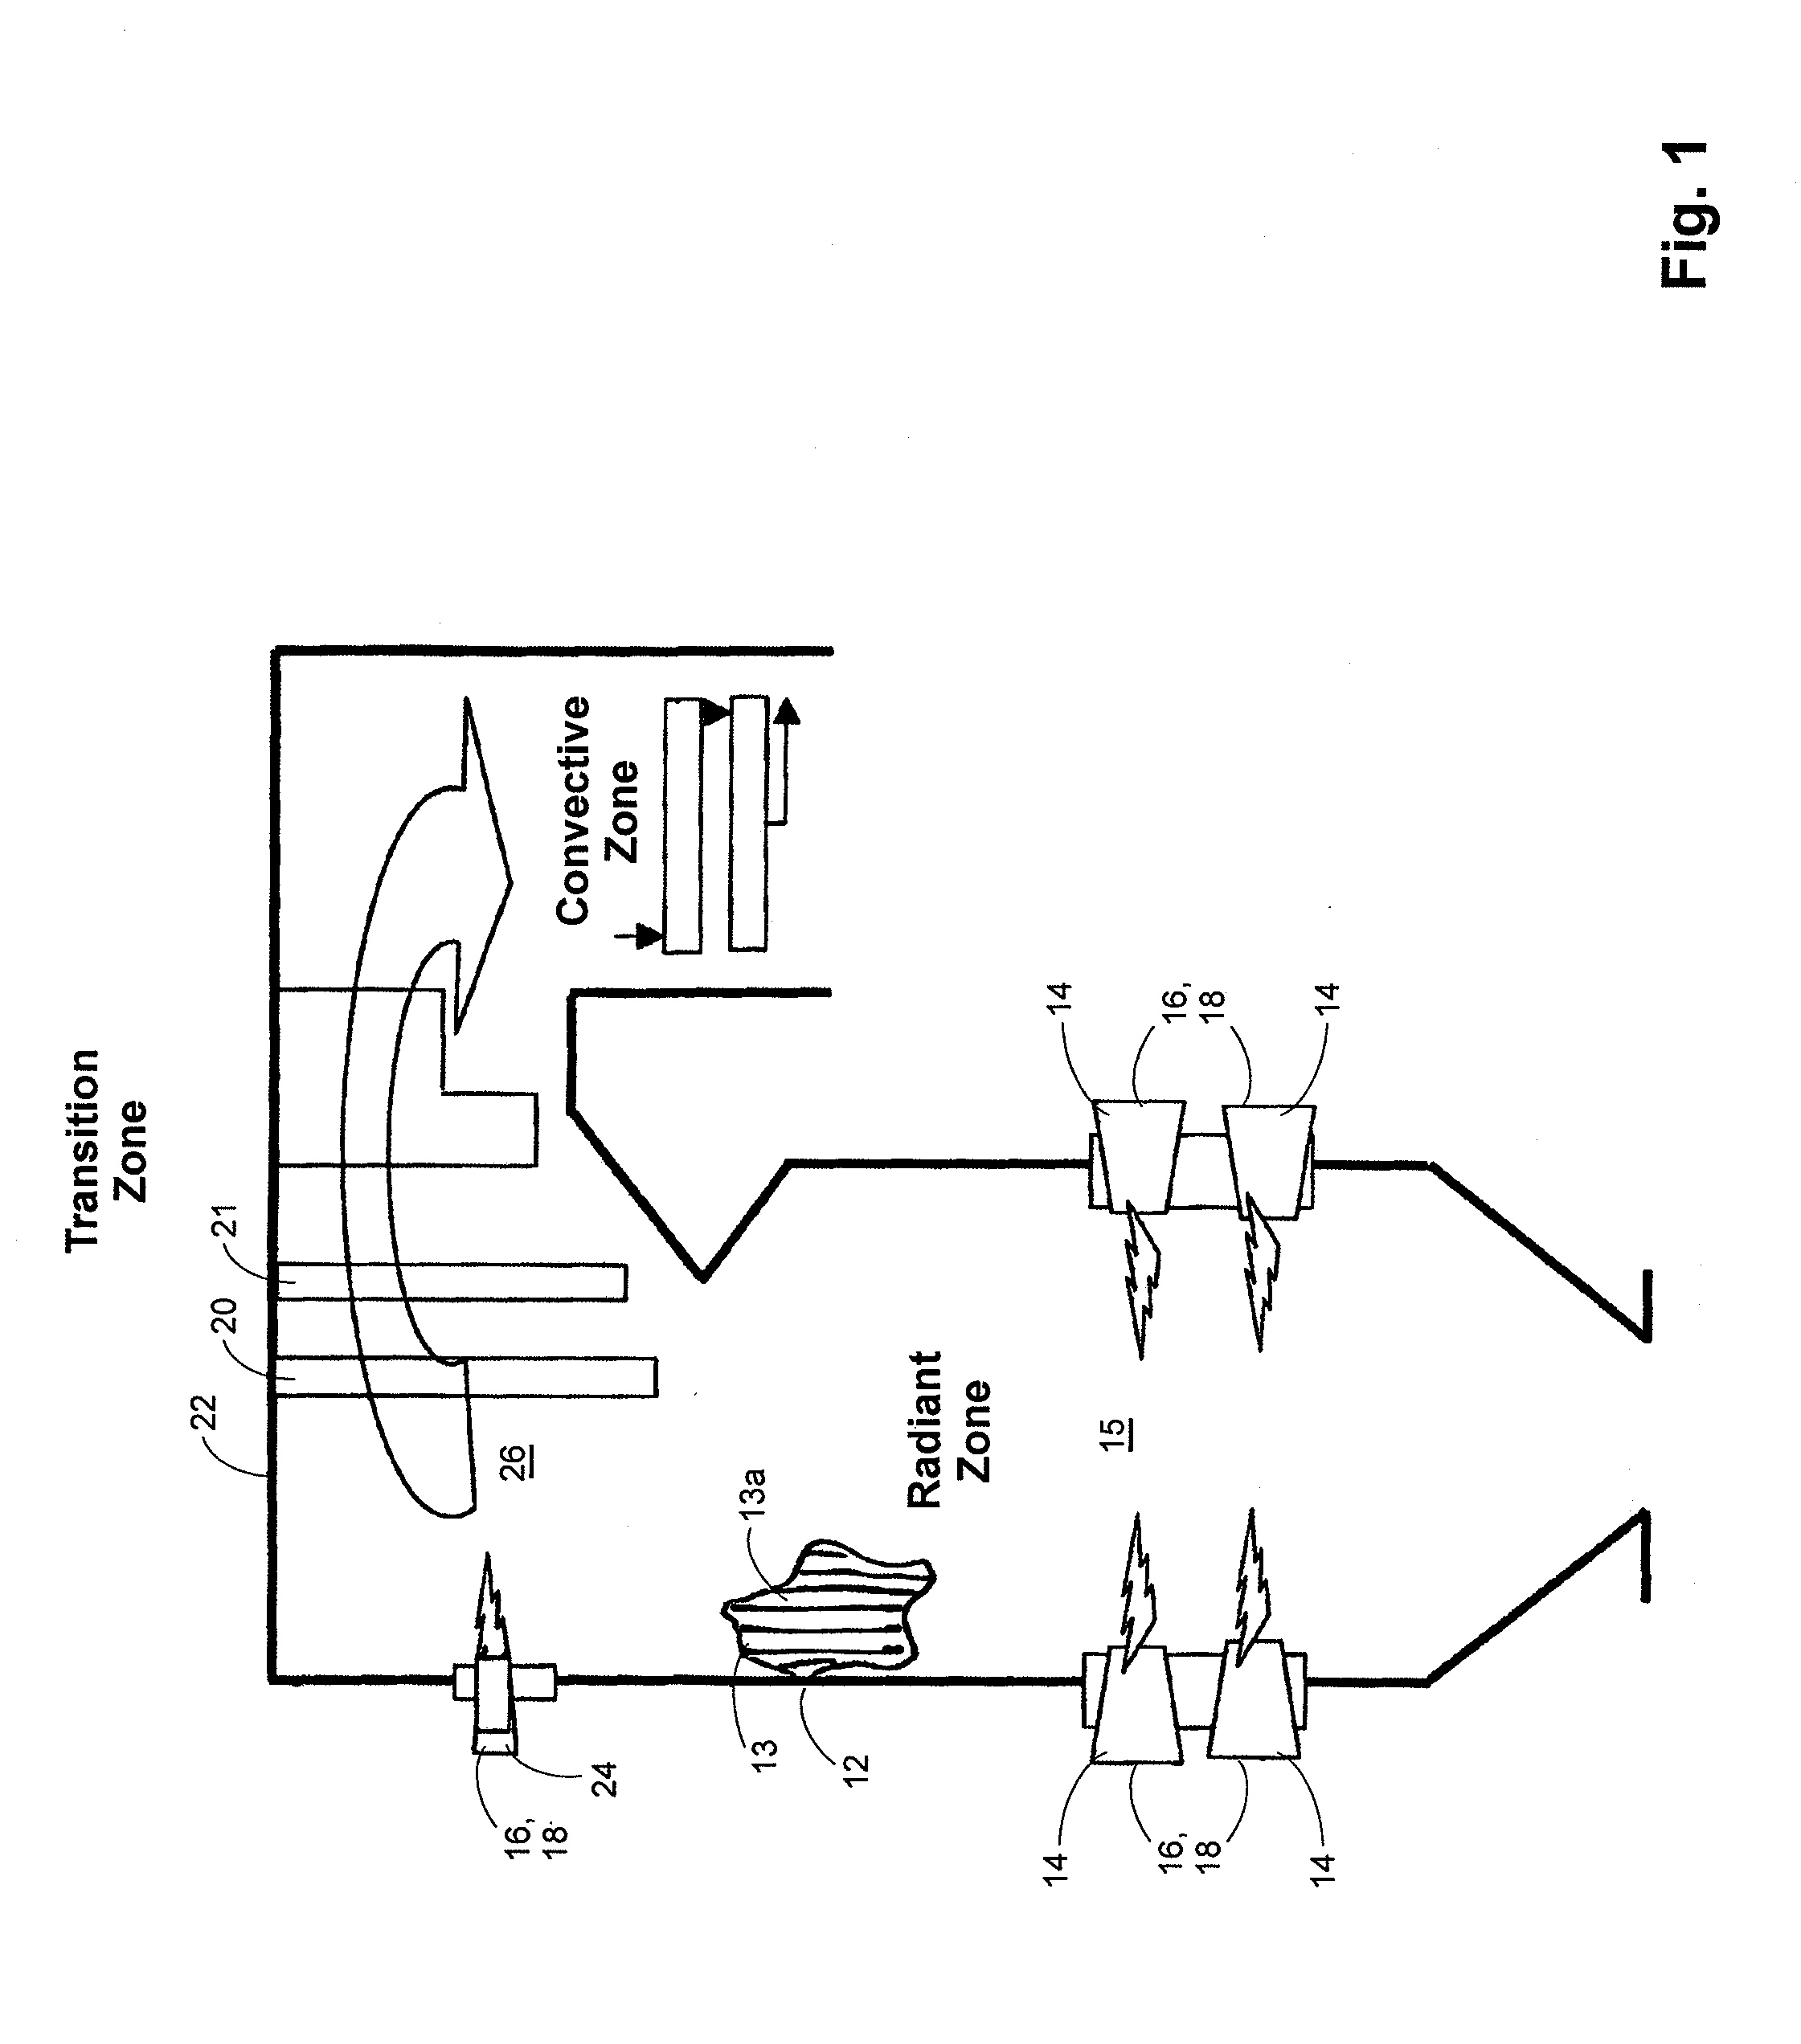 Oxy-fuel combustion system with closed loop flame temperature control